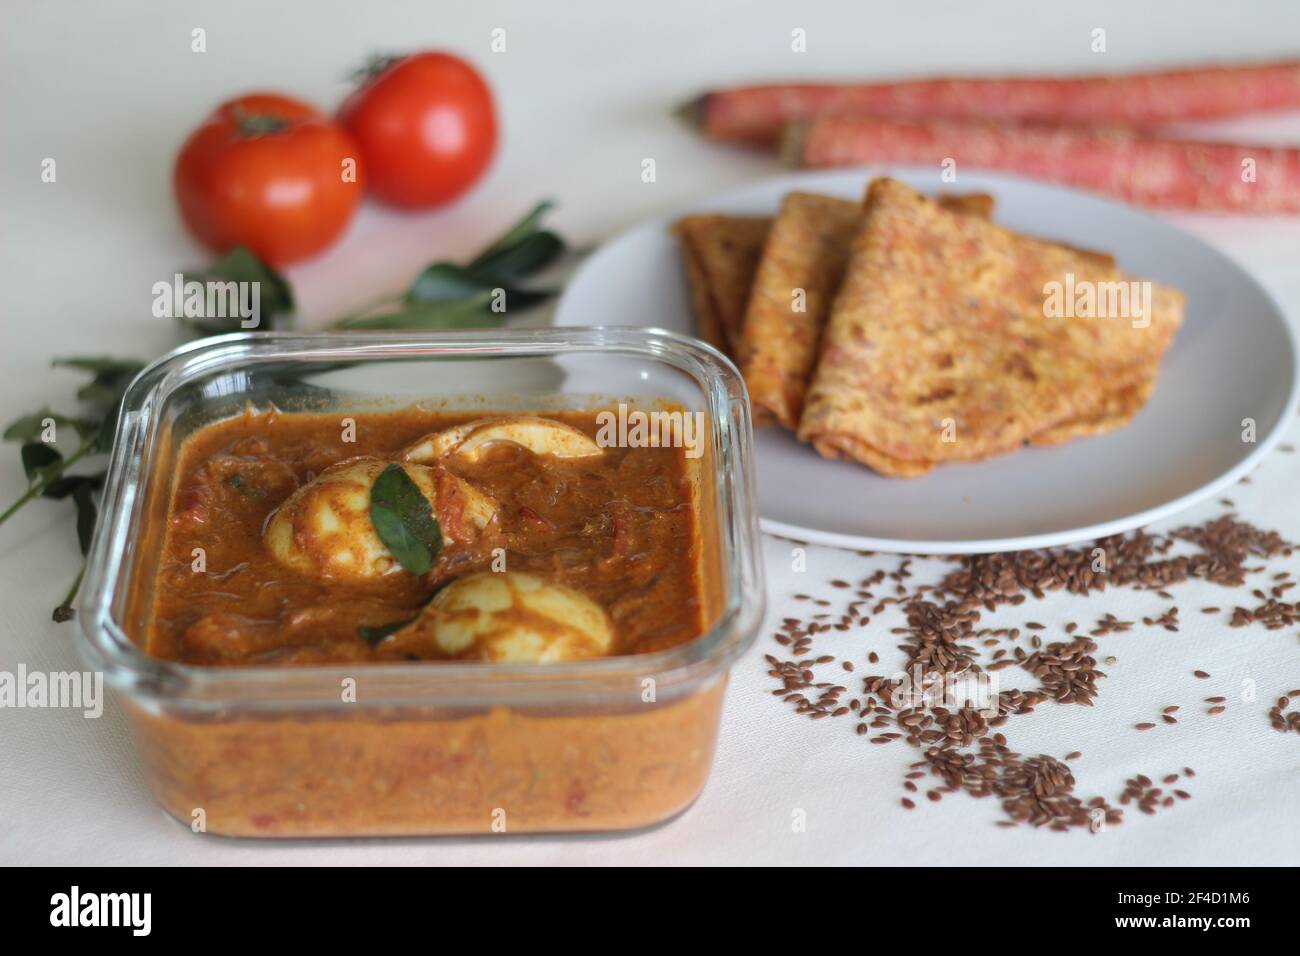 Boiled egg curry, a cashew tomato based gravy served along with whole wheat Indian flat bread made of grated carrots and powdered flax seed. Shot on w Stock Photo